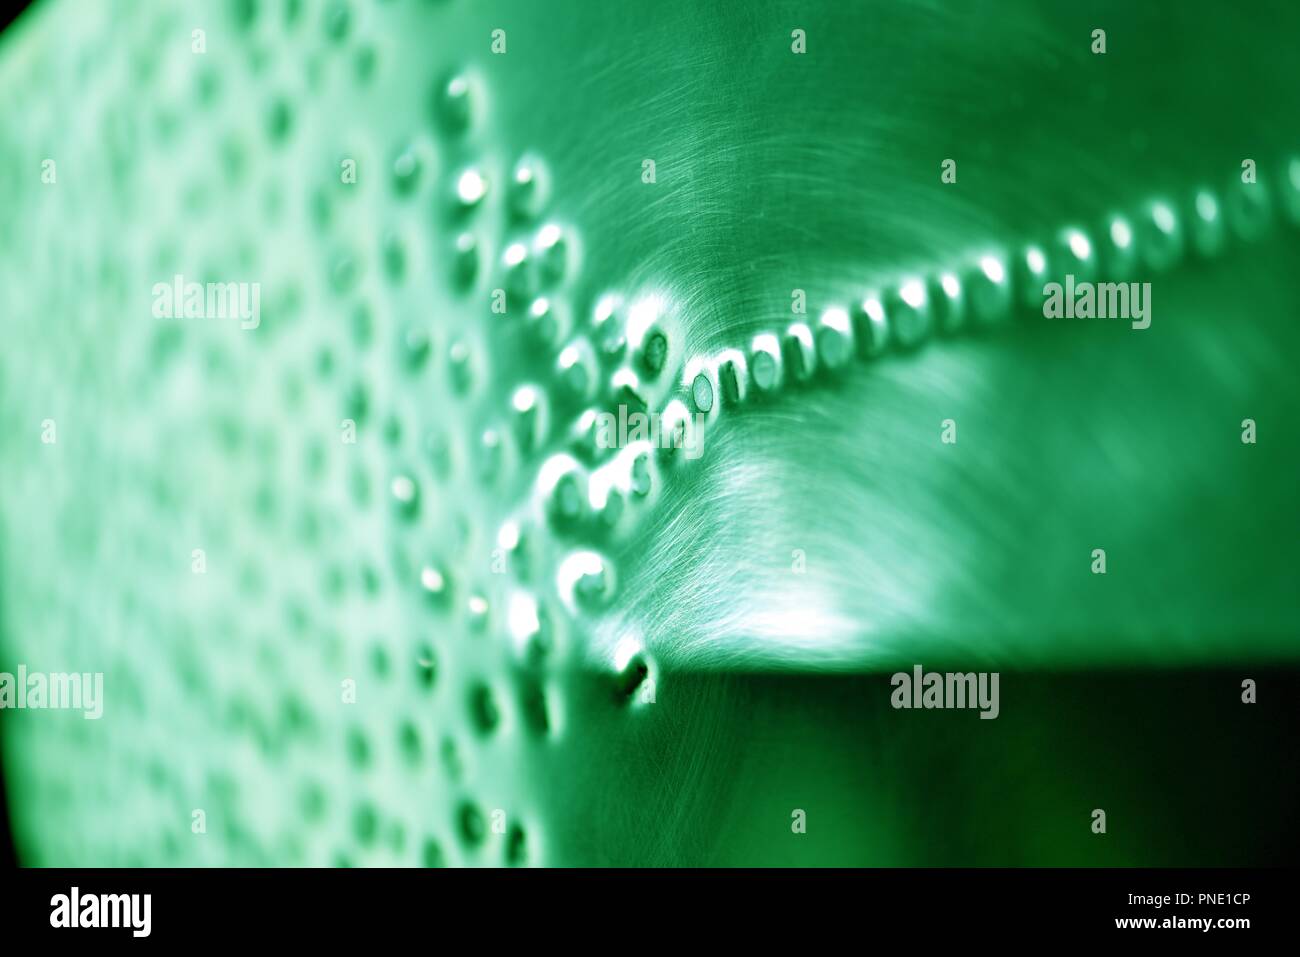 Binary code: digital language emerging from a numerical cloud Stock Photo